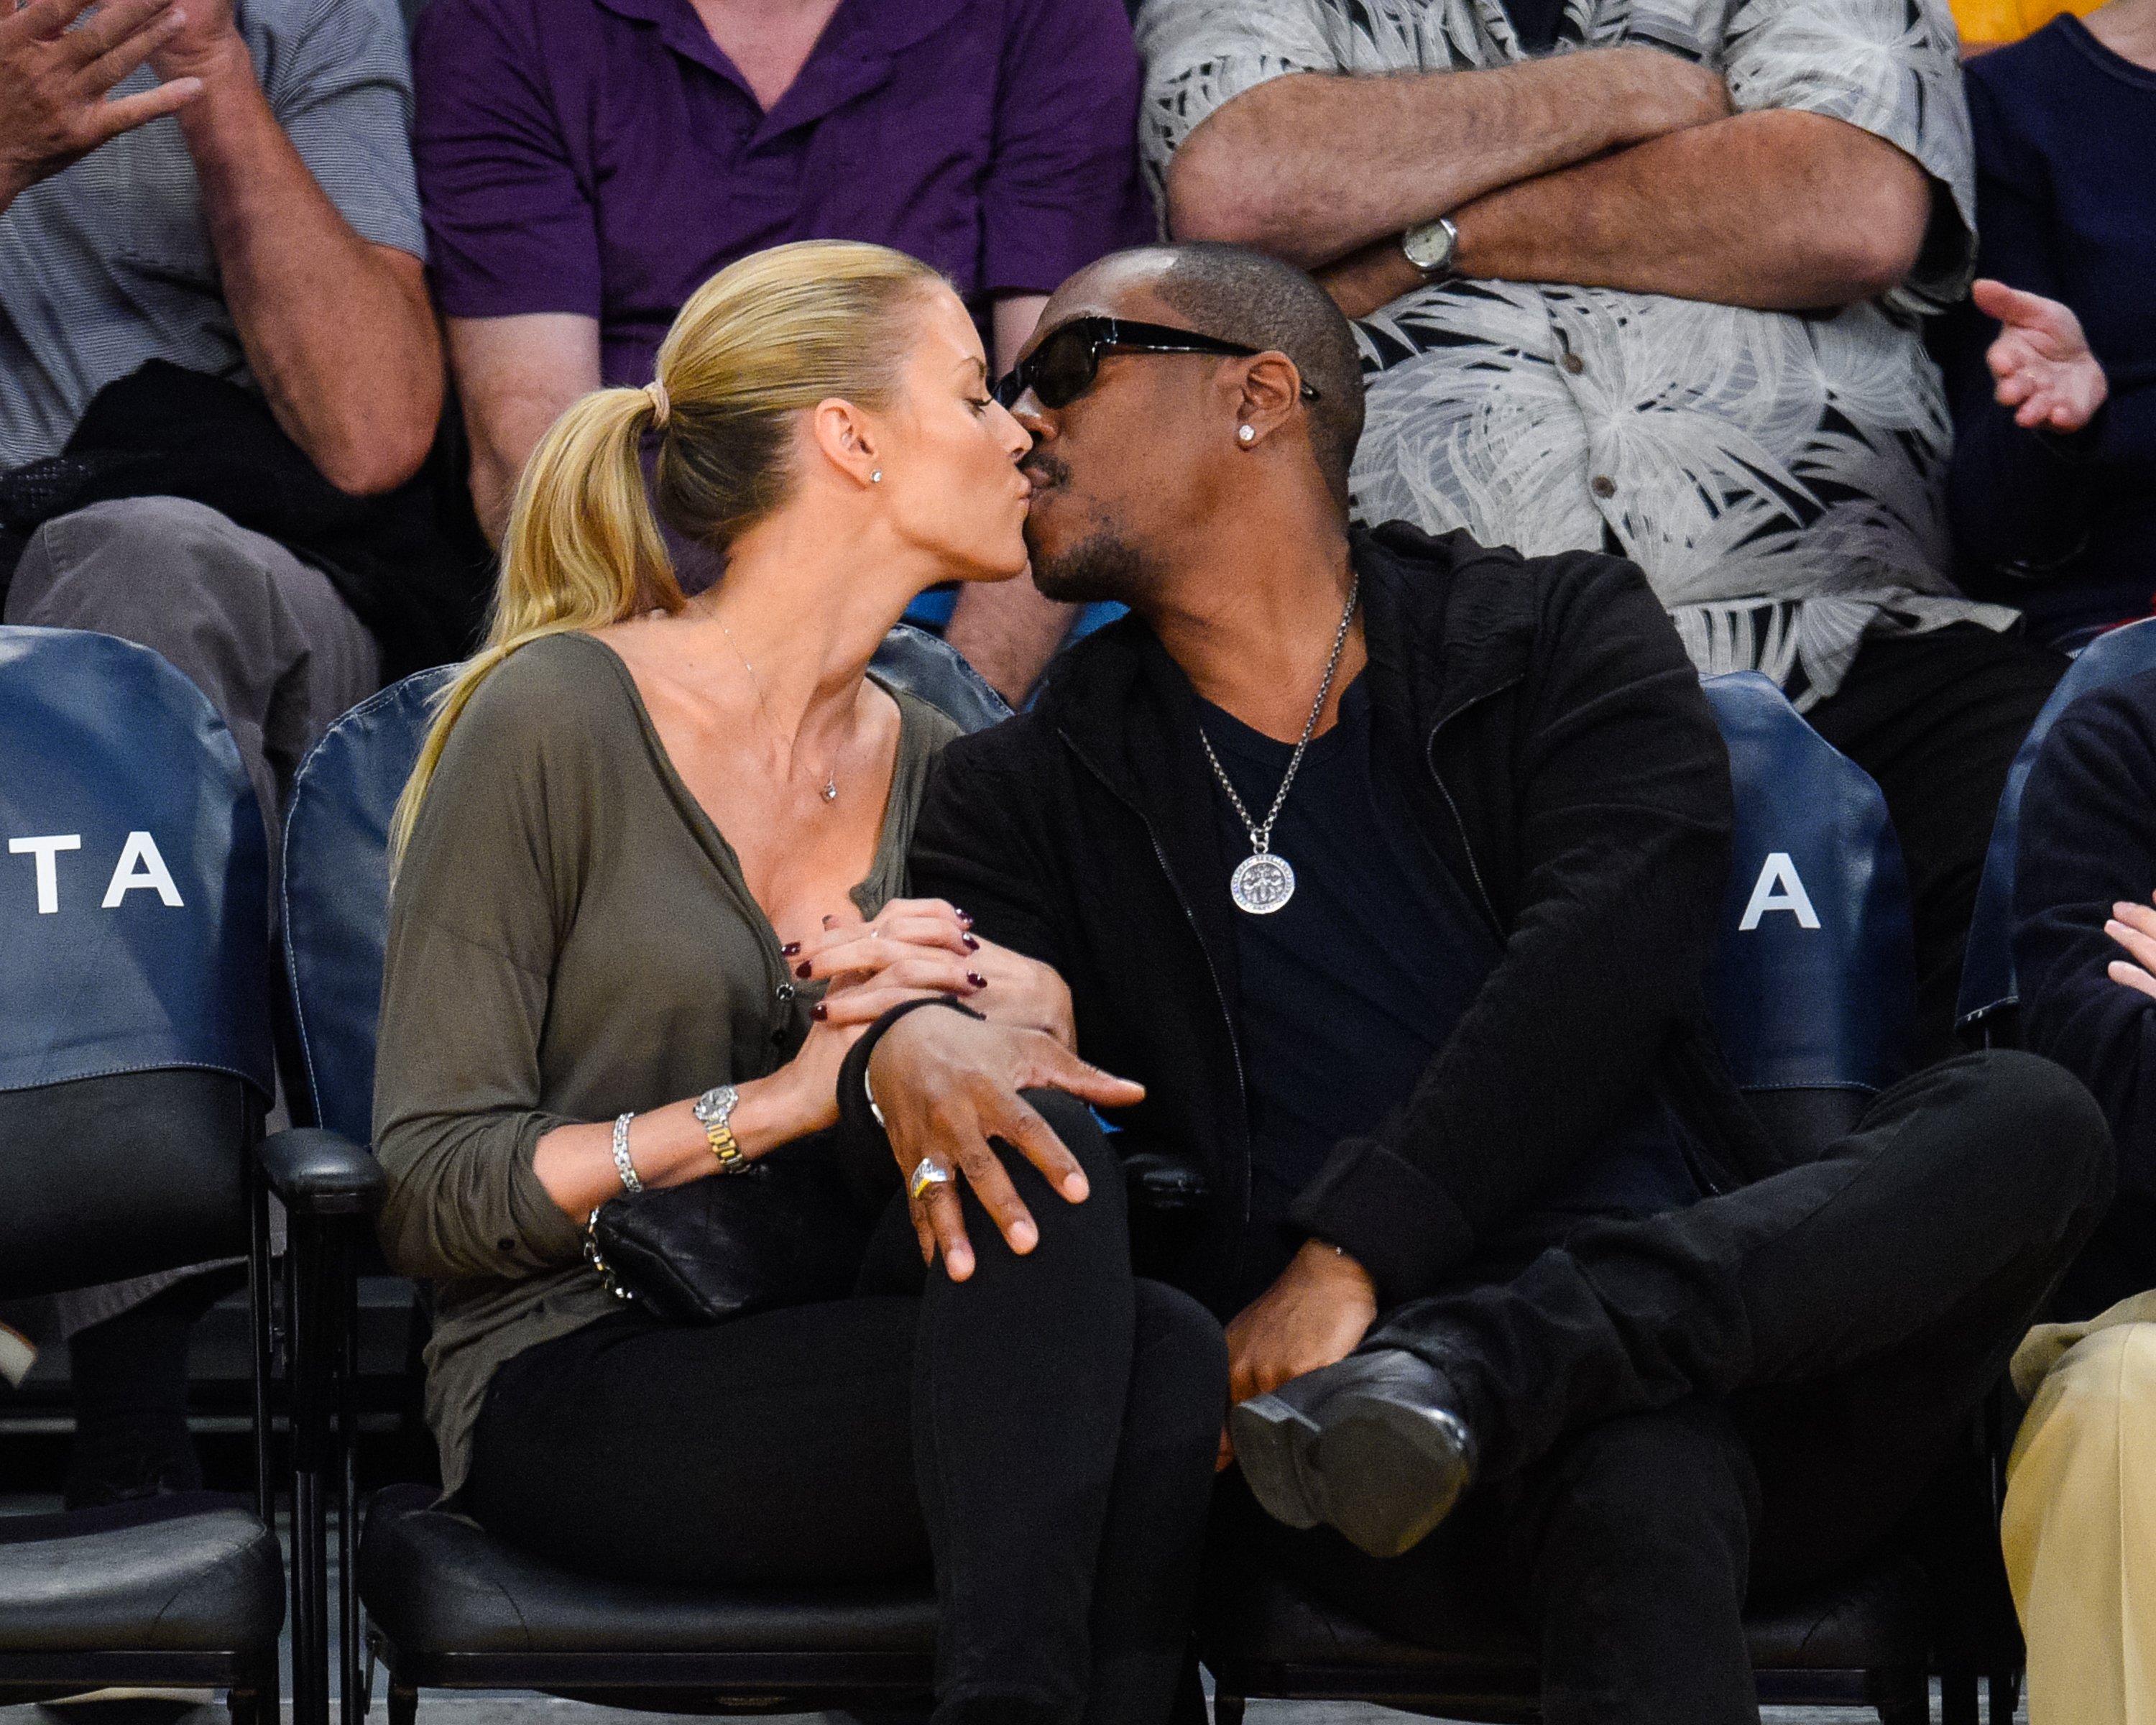 Paige Butcher and Eddie Murphy at a basketball game at Staples Center on April 12, 2015, in Los Angeles, California. | Source: Getty Images